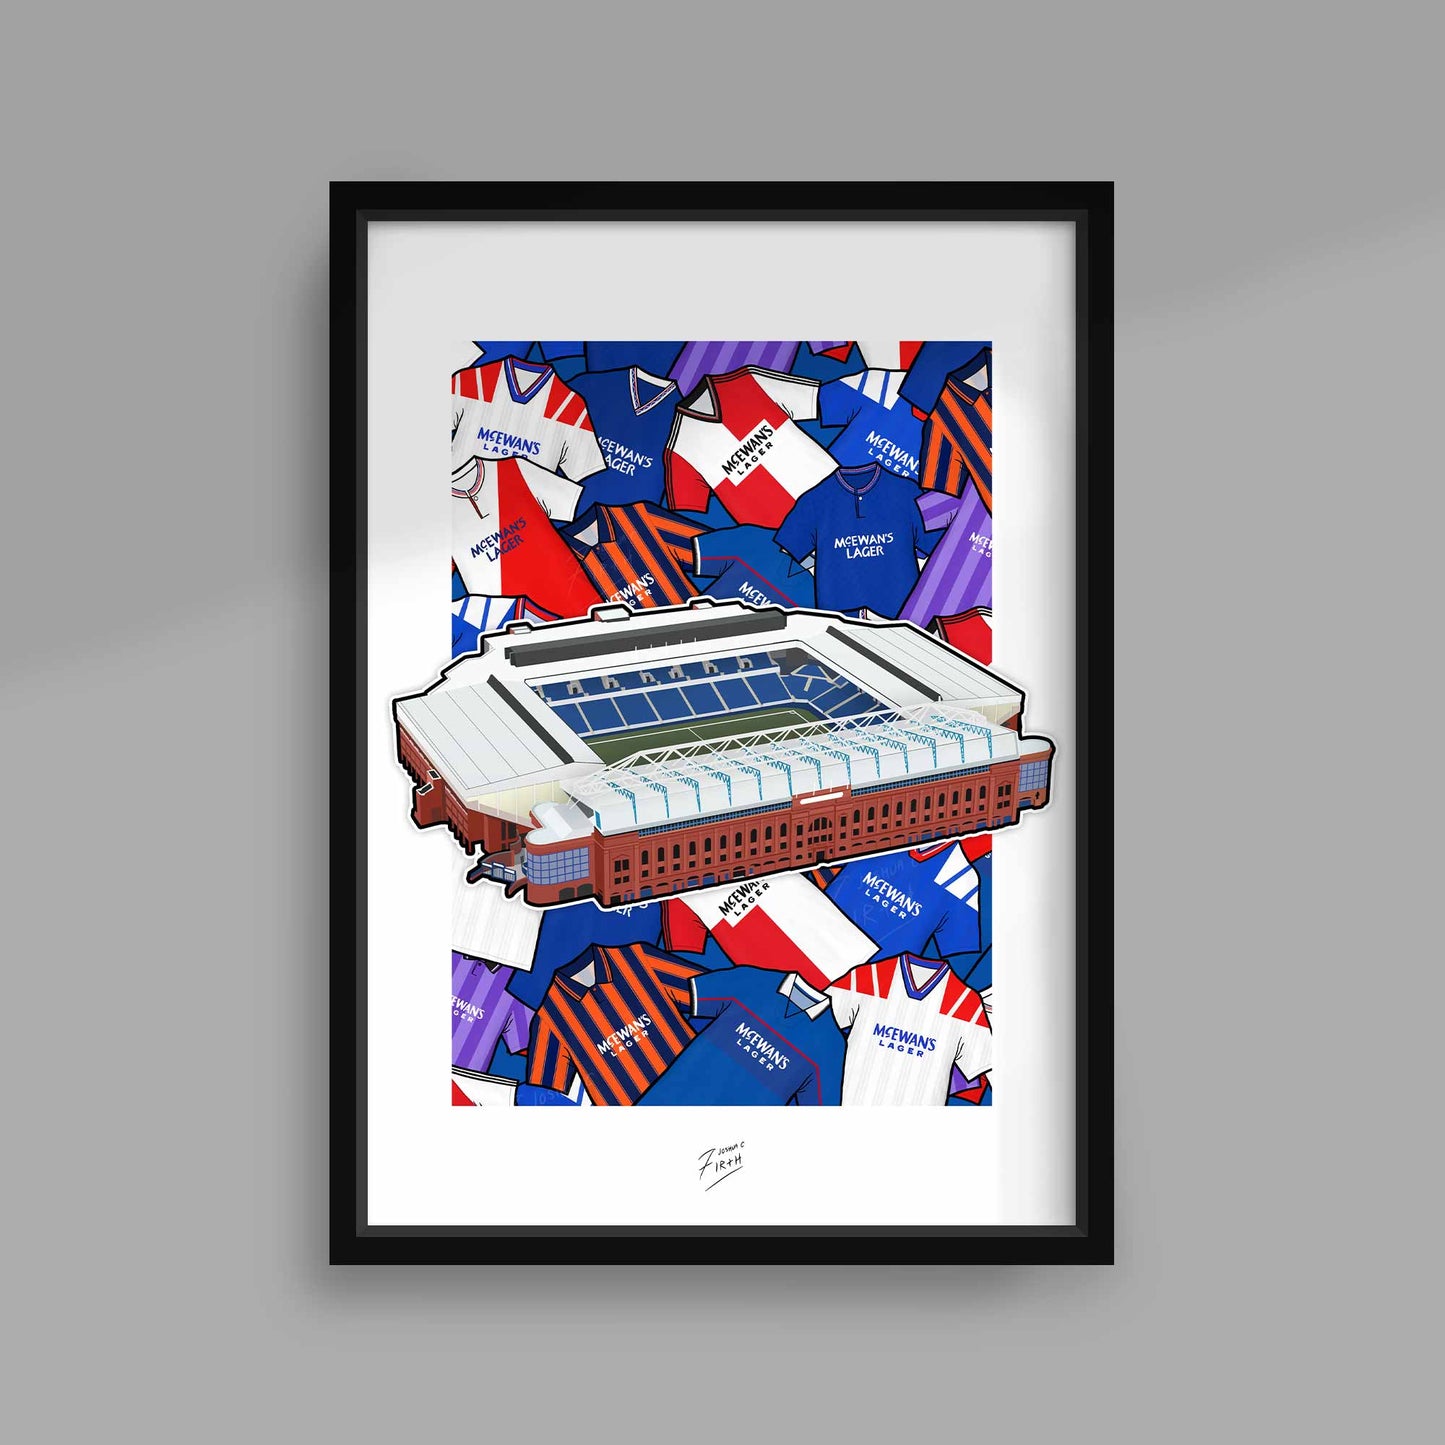 Art poster print inspired by the home of the Glasgow Rangers, Ibrox Stadium. The most successful football team in Scotland with a retro touch